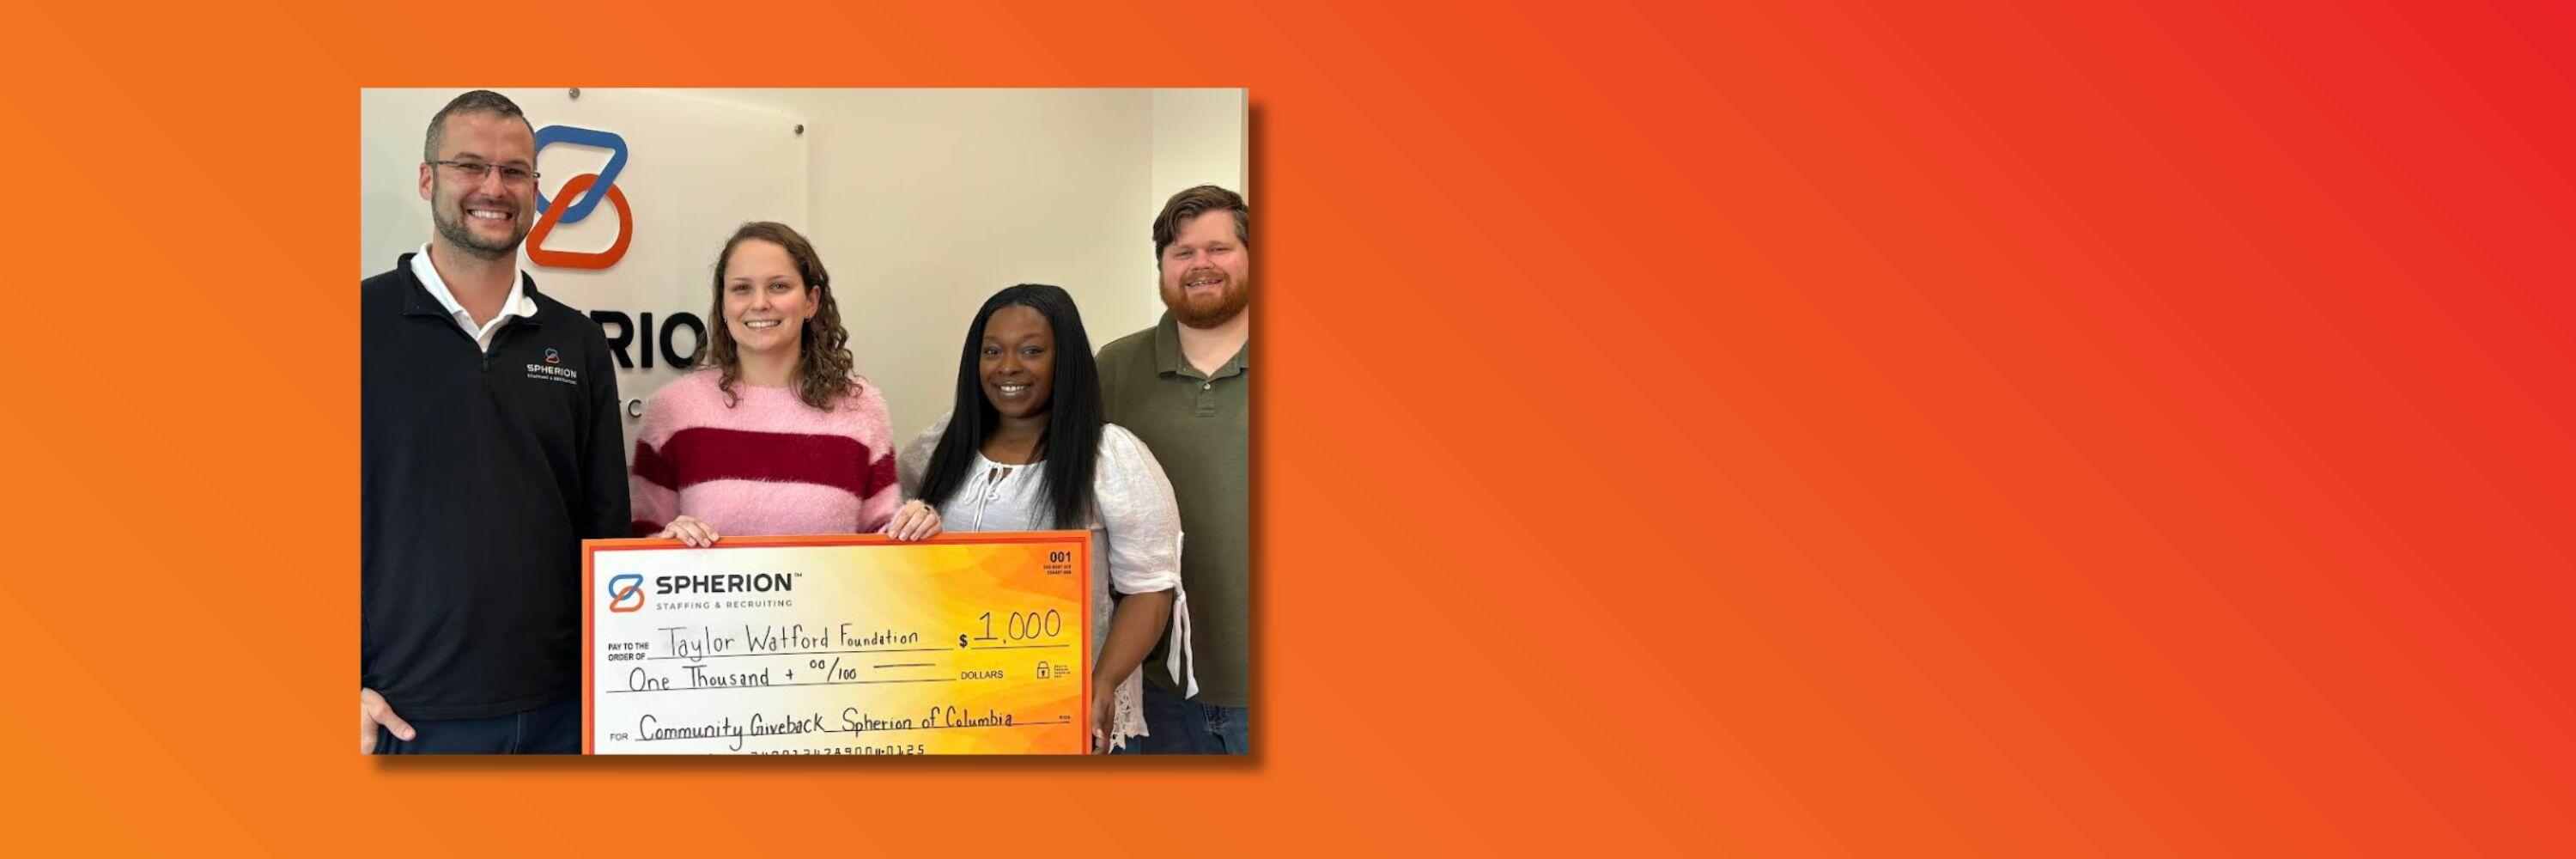 Orange background with a photo of four people holding a giant orange and yellow check for $1,000